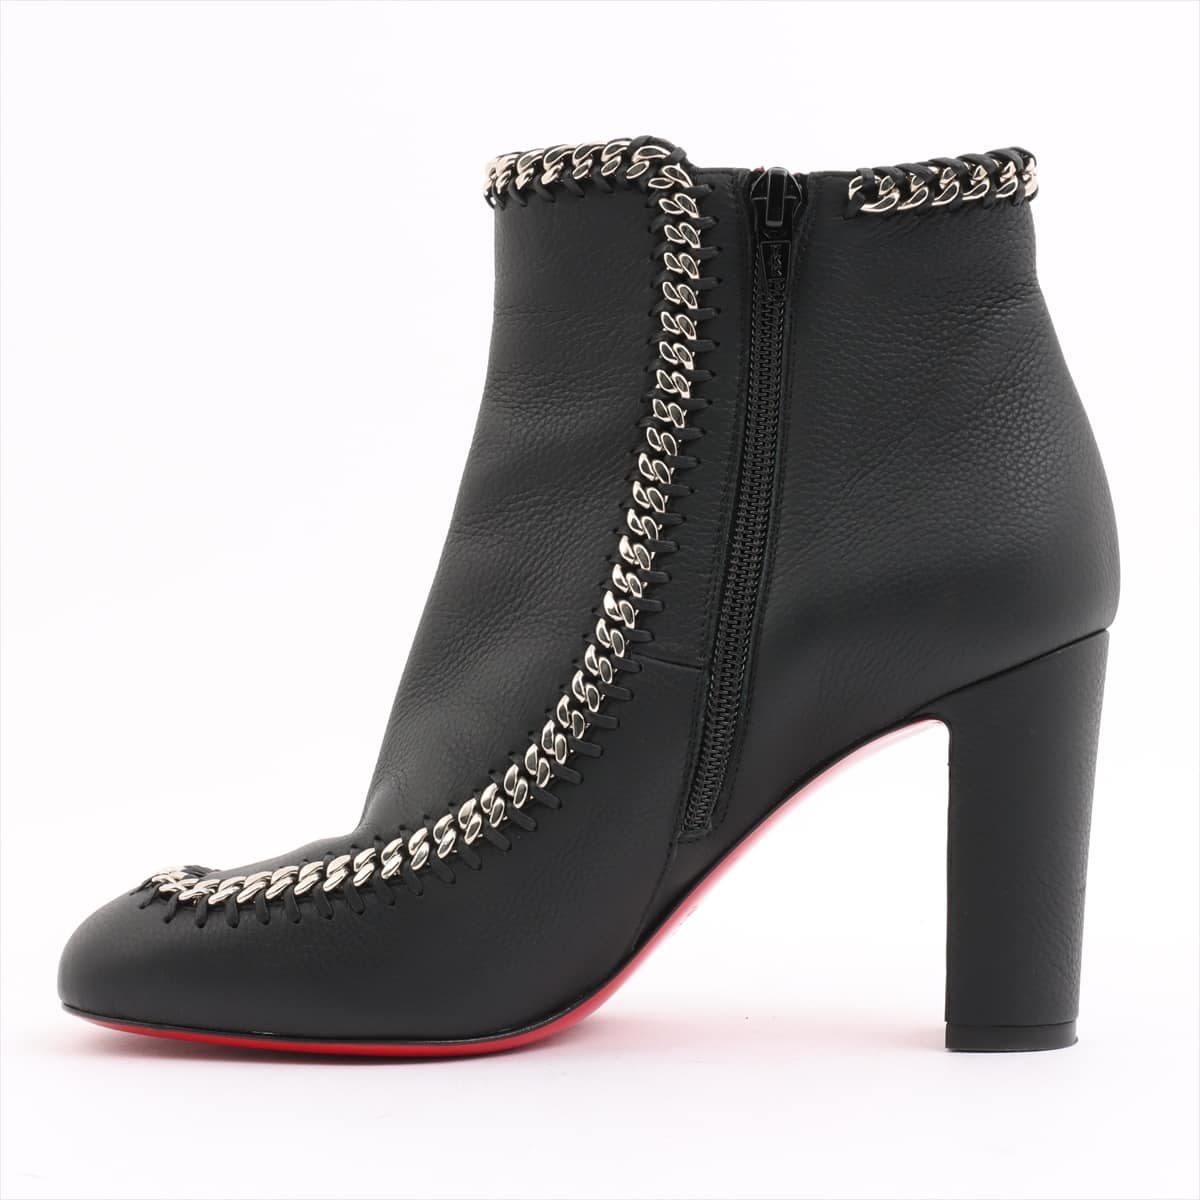 Christian Louboutin Leather Short Boots 37 1/2 Ladies' Black Chain